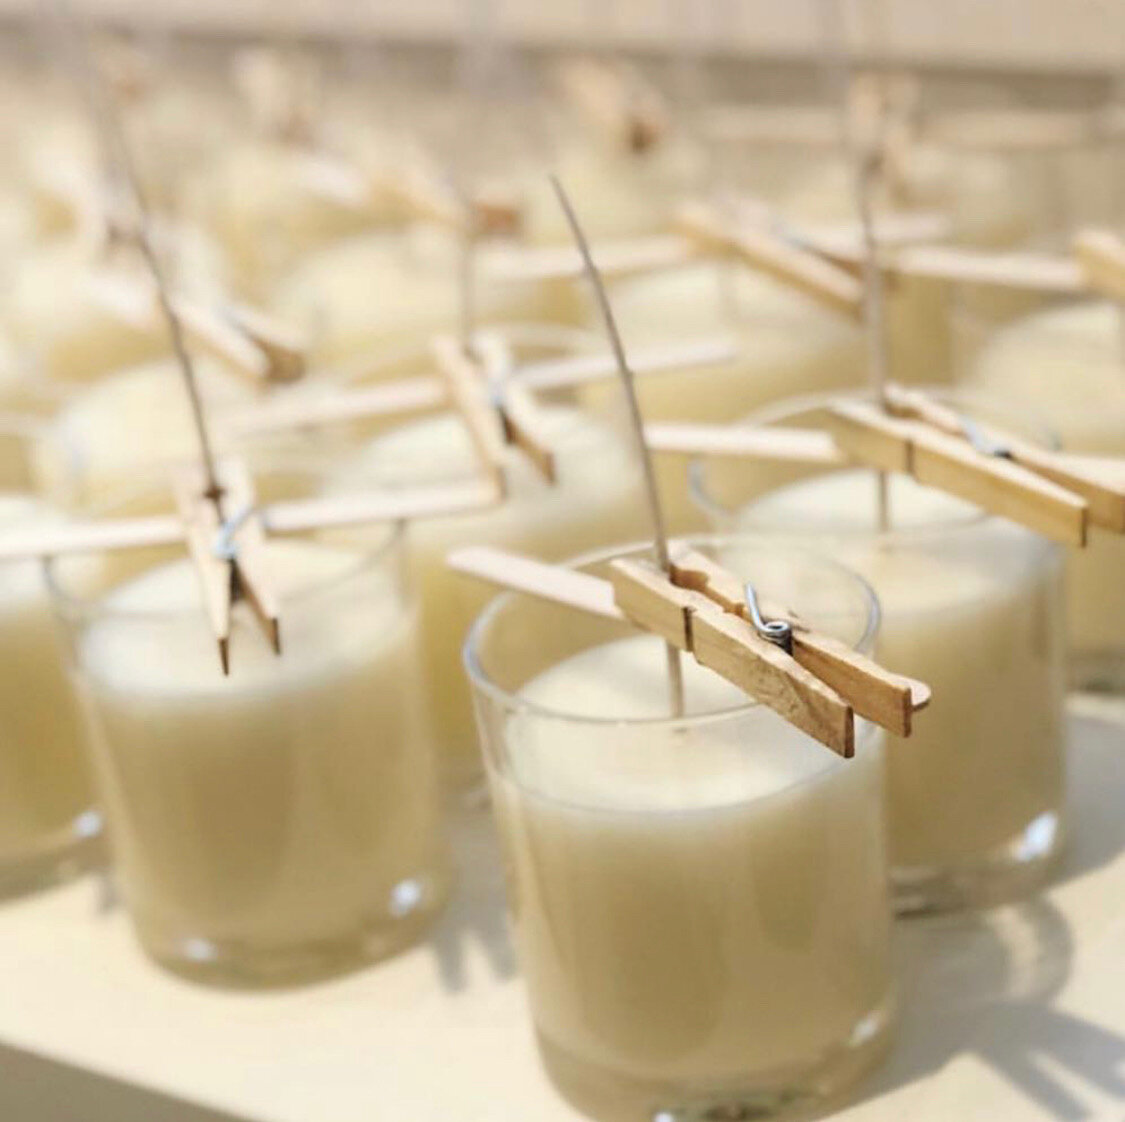 Making Container Candles using Soy Wax - CandleMaking